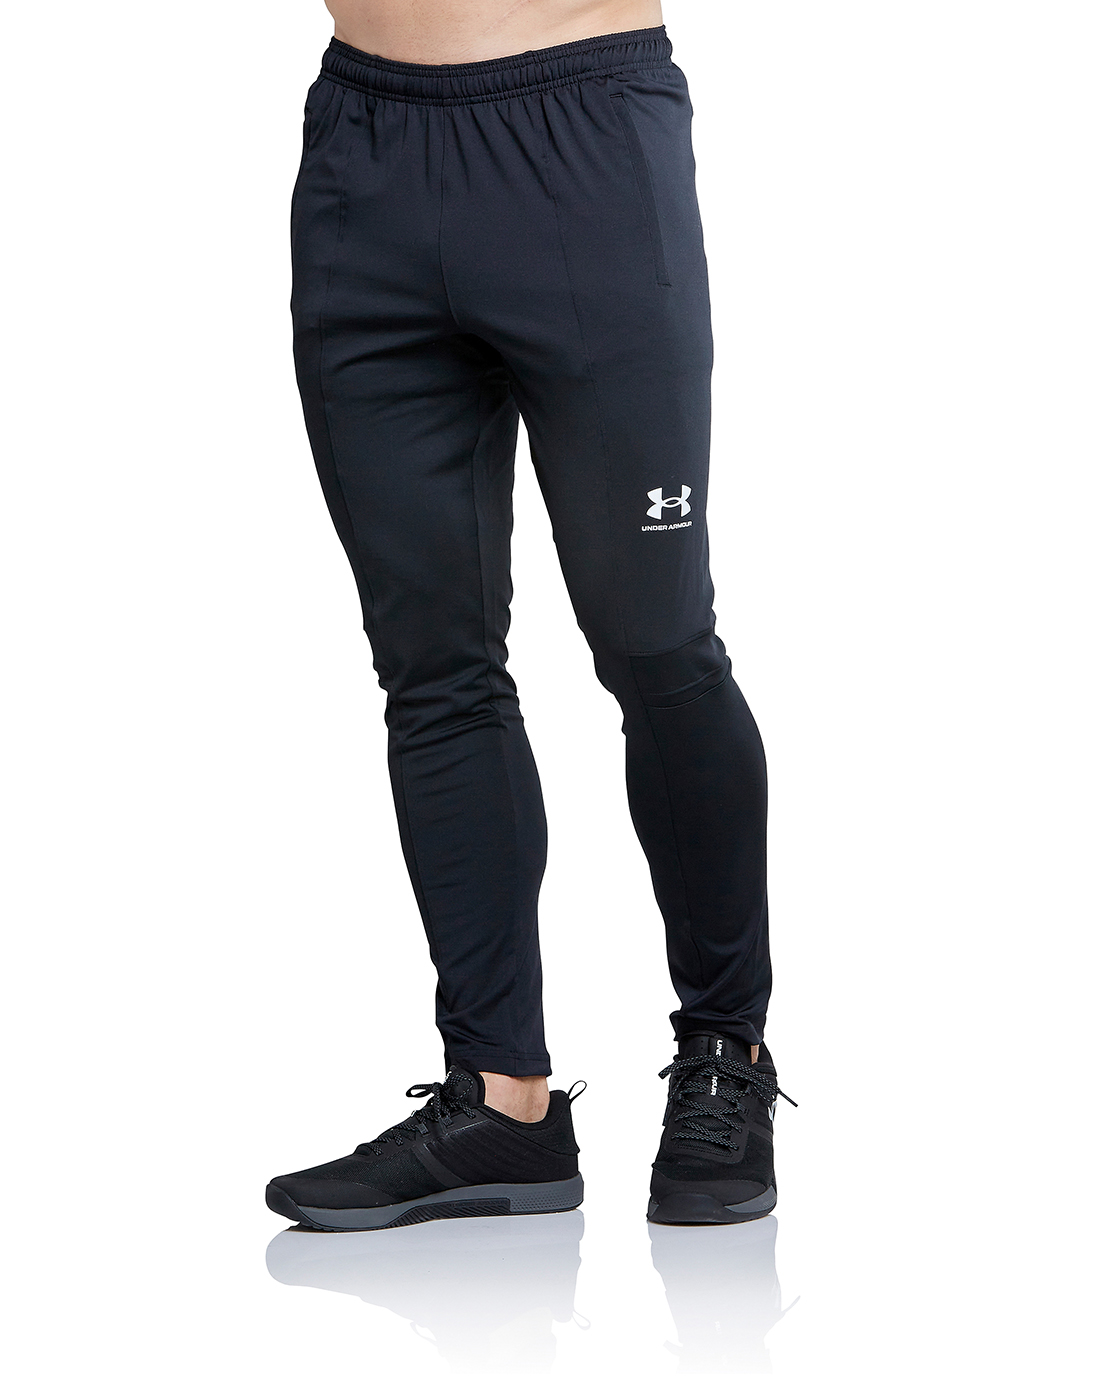 Under Armour Mens Challenger Training Pant - Black | Life Style Sports IE